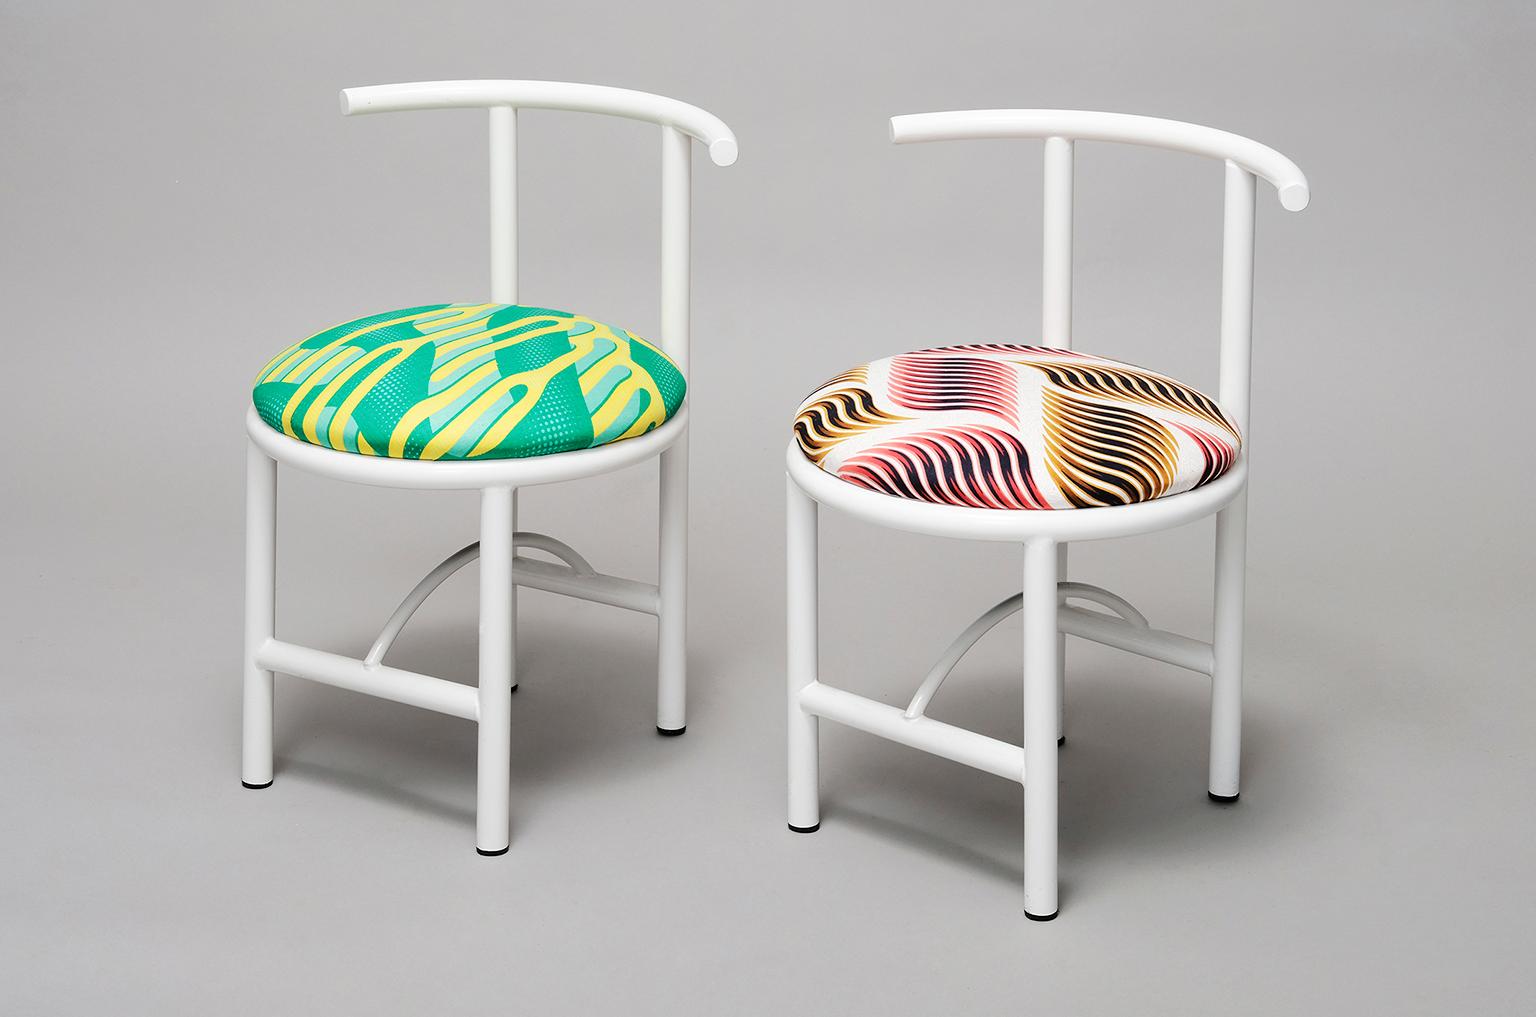 CANTINA by Clemence Seilles.

Cantina is an interpretation of the popular restaurant and diner chairs. Its metal curves with a colorful pattern seat in textile make it ideal for daily use.

Designer: Clemence Seilles 
Materials: Metal,